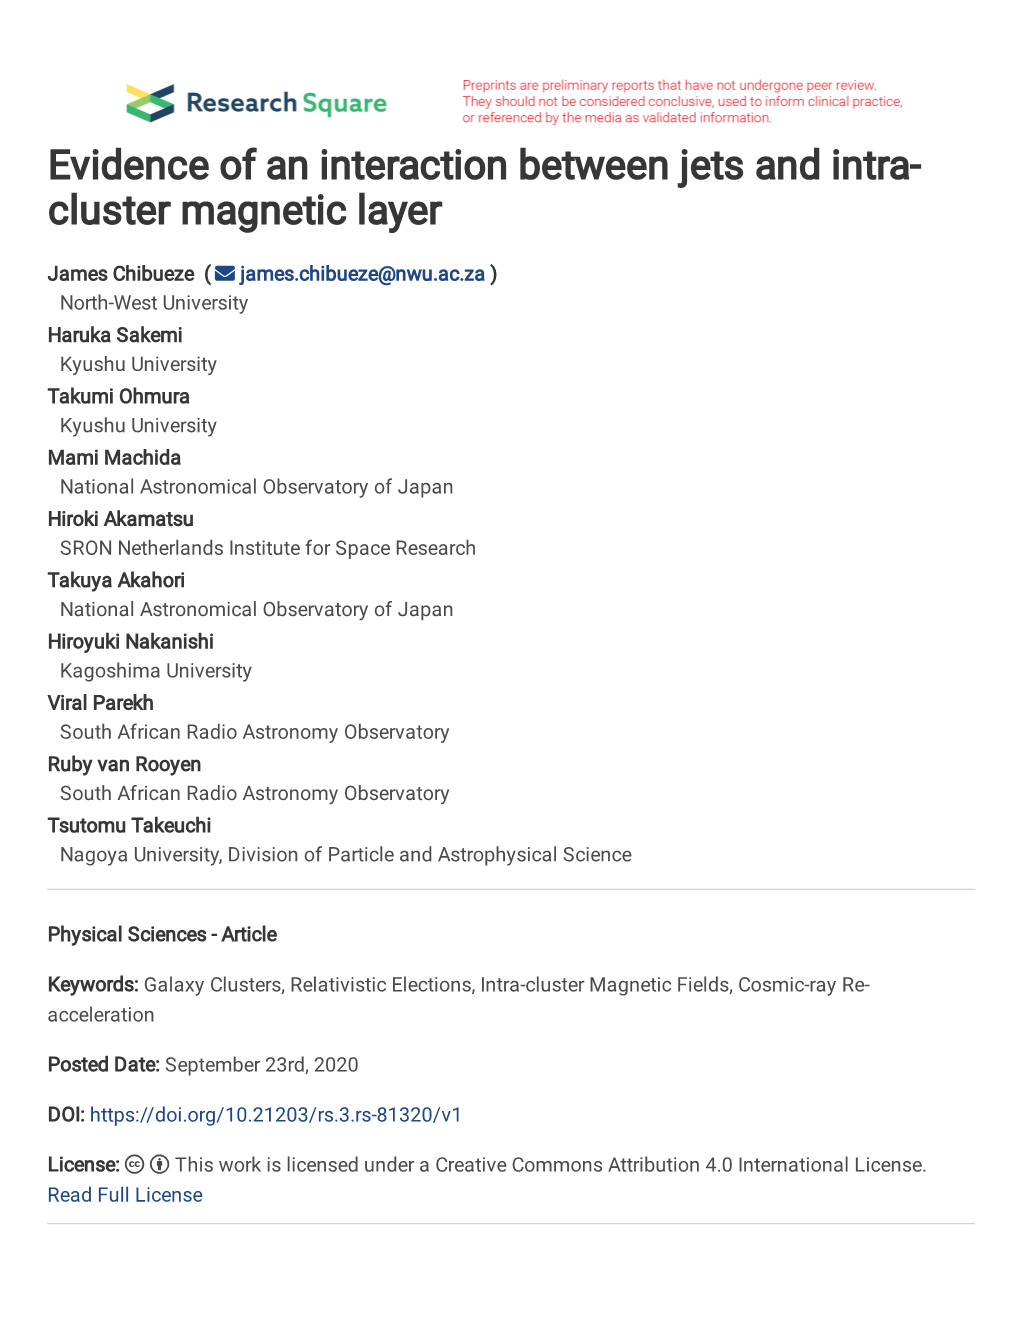 Evidence of an Interaction Between Jets and Intra-Cluster Magnetic Layer